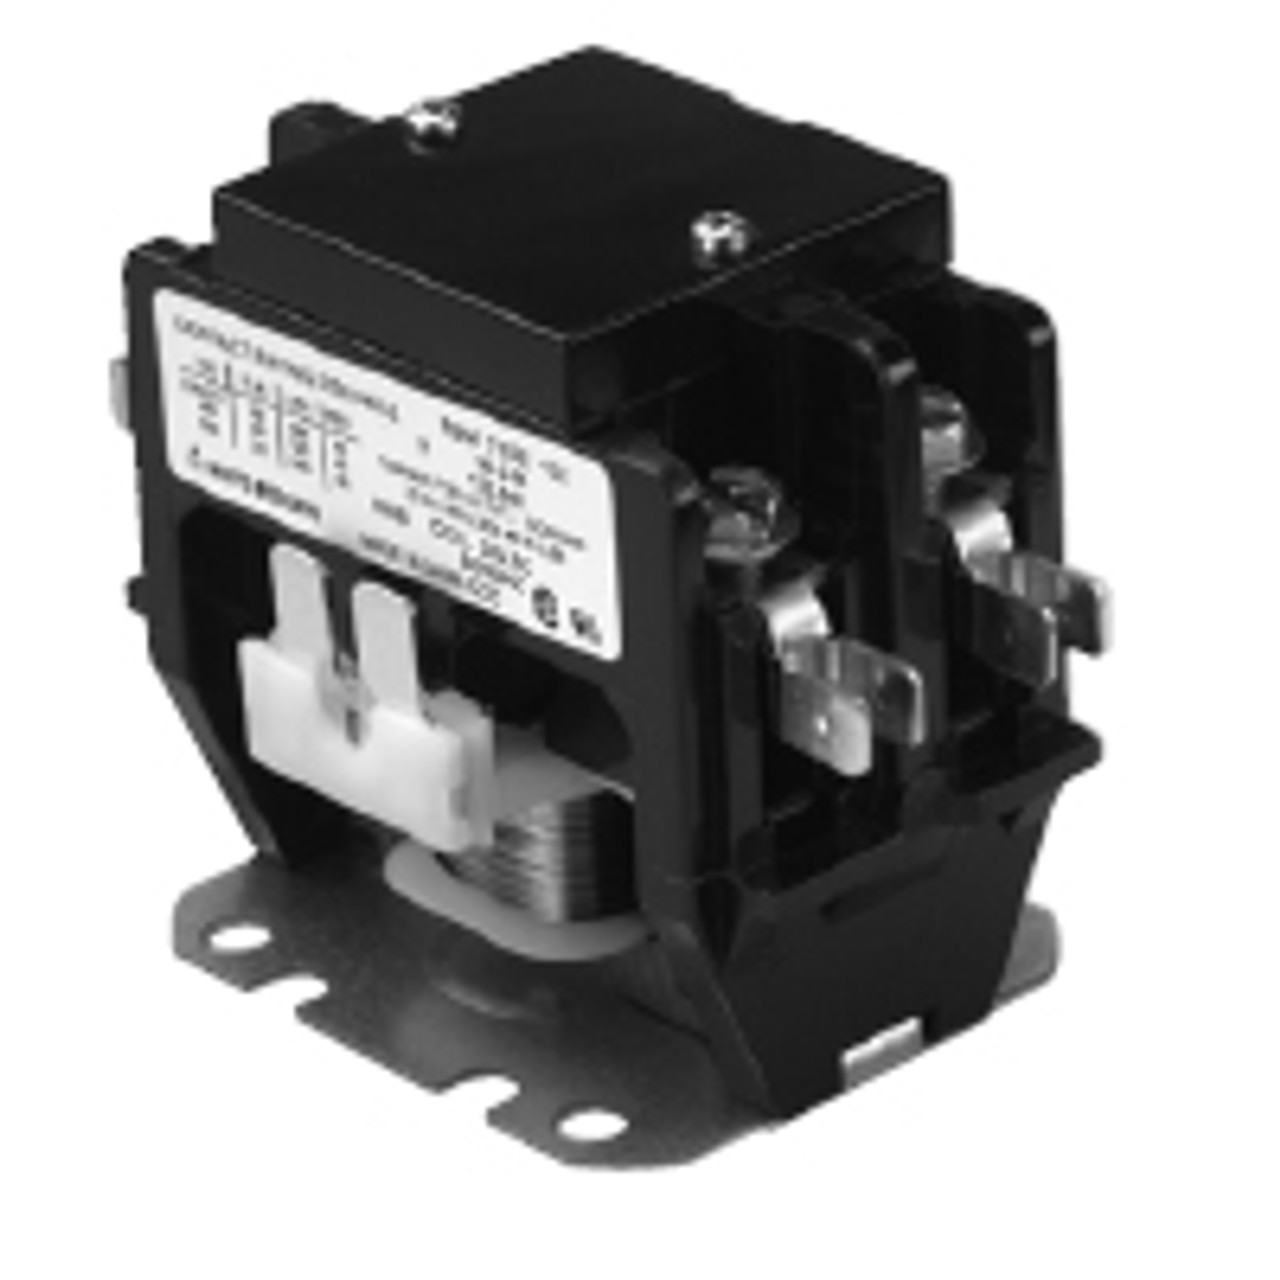 Stancor / White Rodgers 122-903 Power Contactors